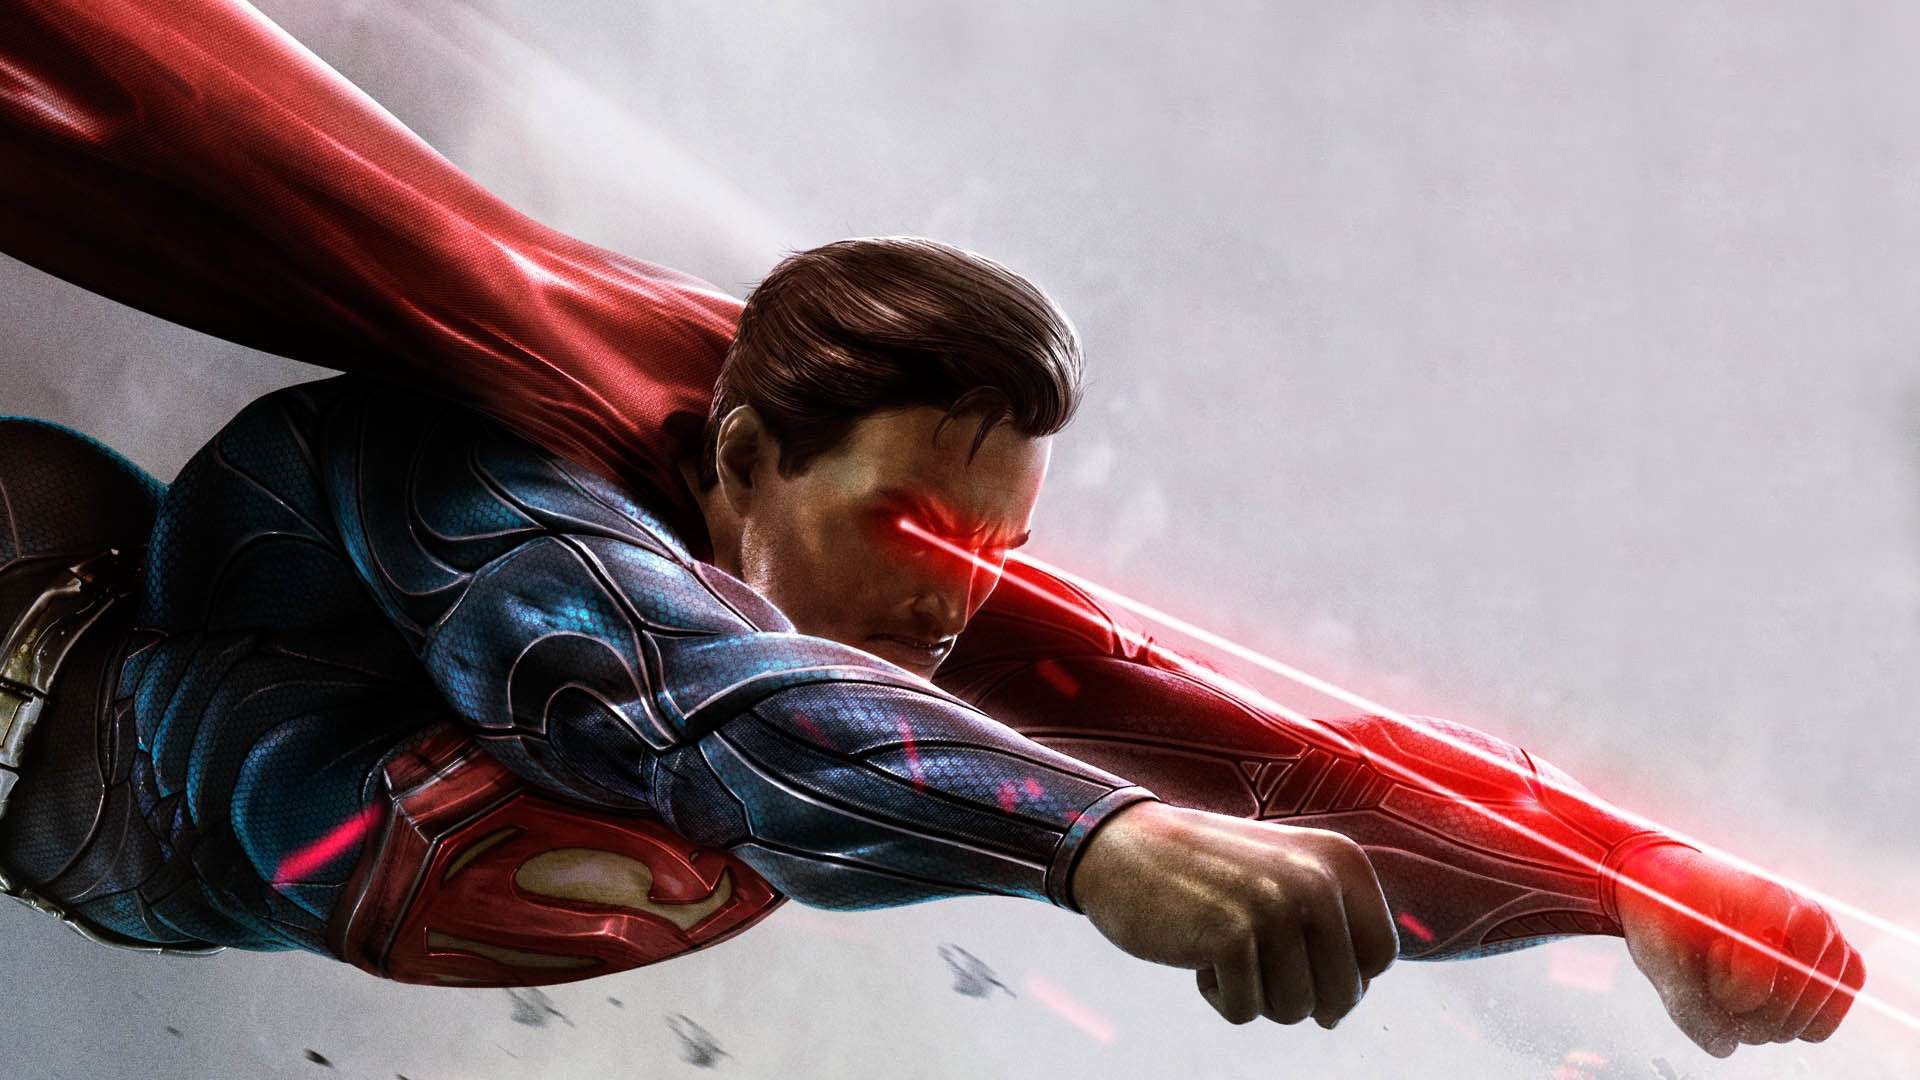 1920x1080 Injustice 2 Superman as Earth